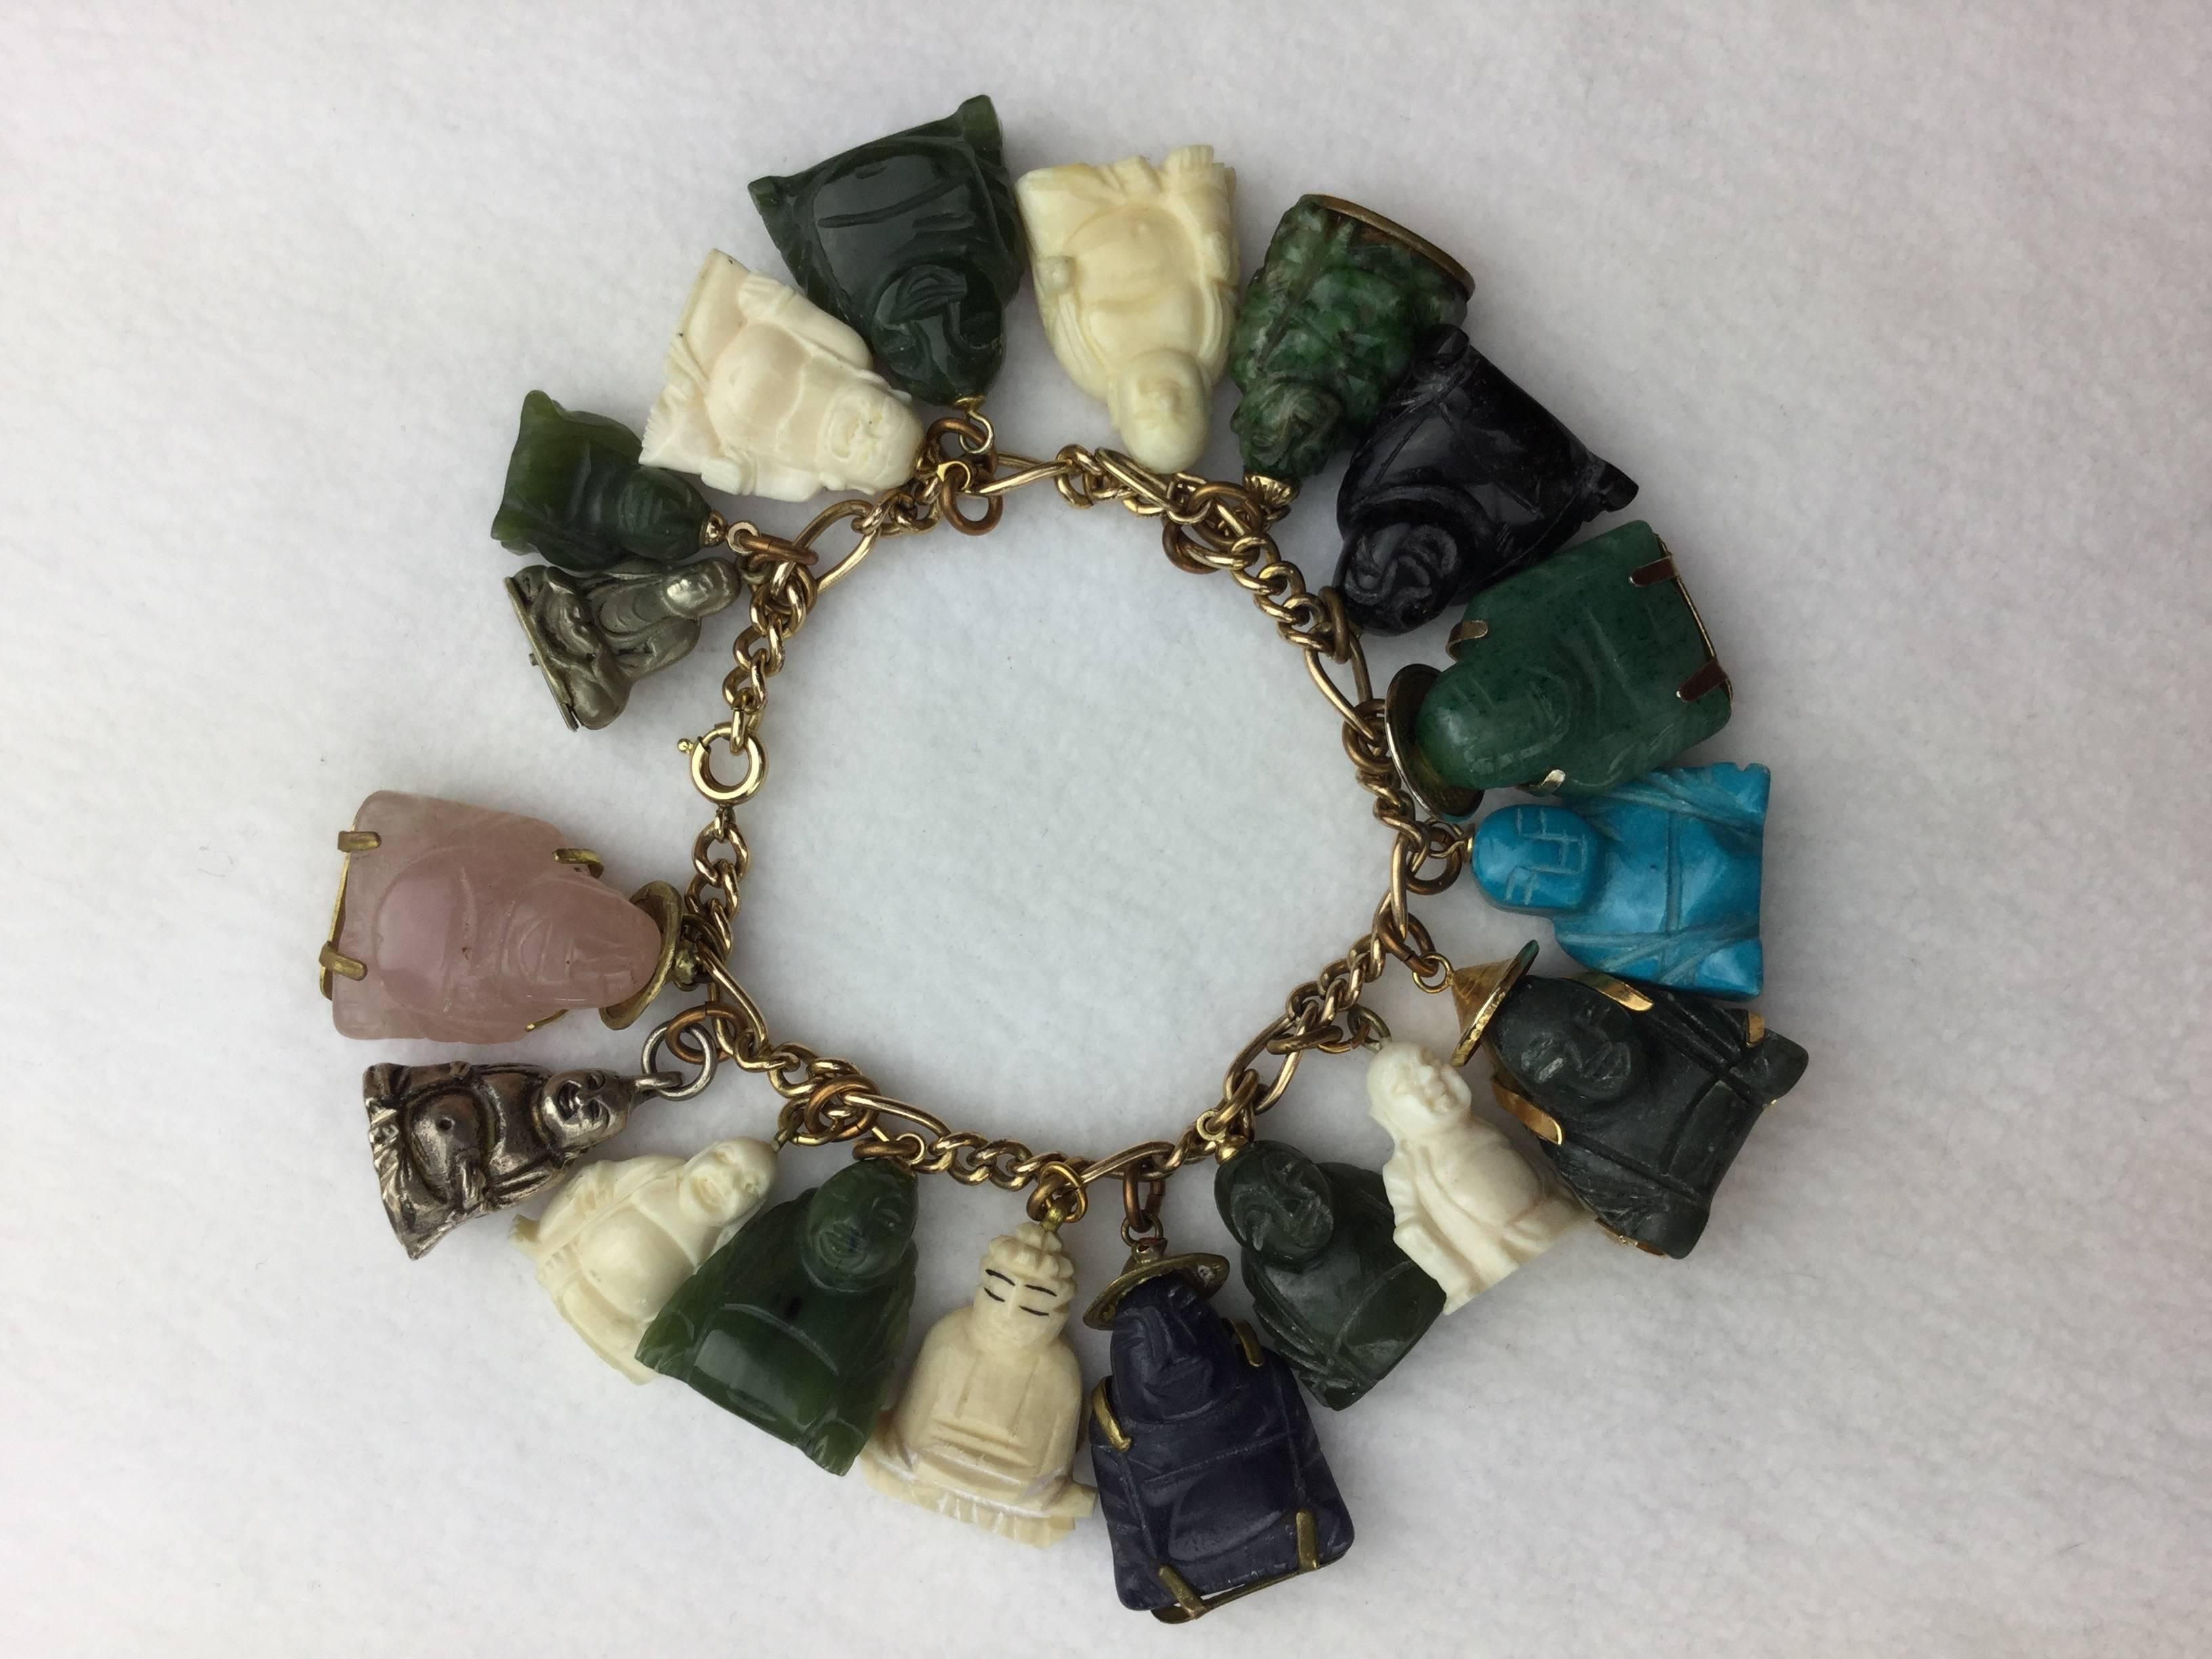 Interesting collection of vintage hand carved stone Buddha's on a gold filled charm bracelet.

This is clearly a collection that was acquired one-by-one, over time, as each Buddha charm is totally unique.

Variously carved jade, lapis, onyx,